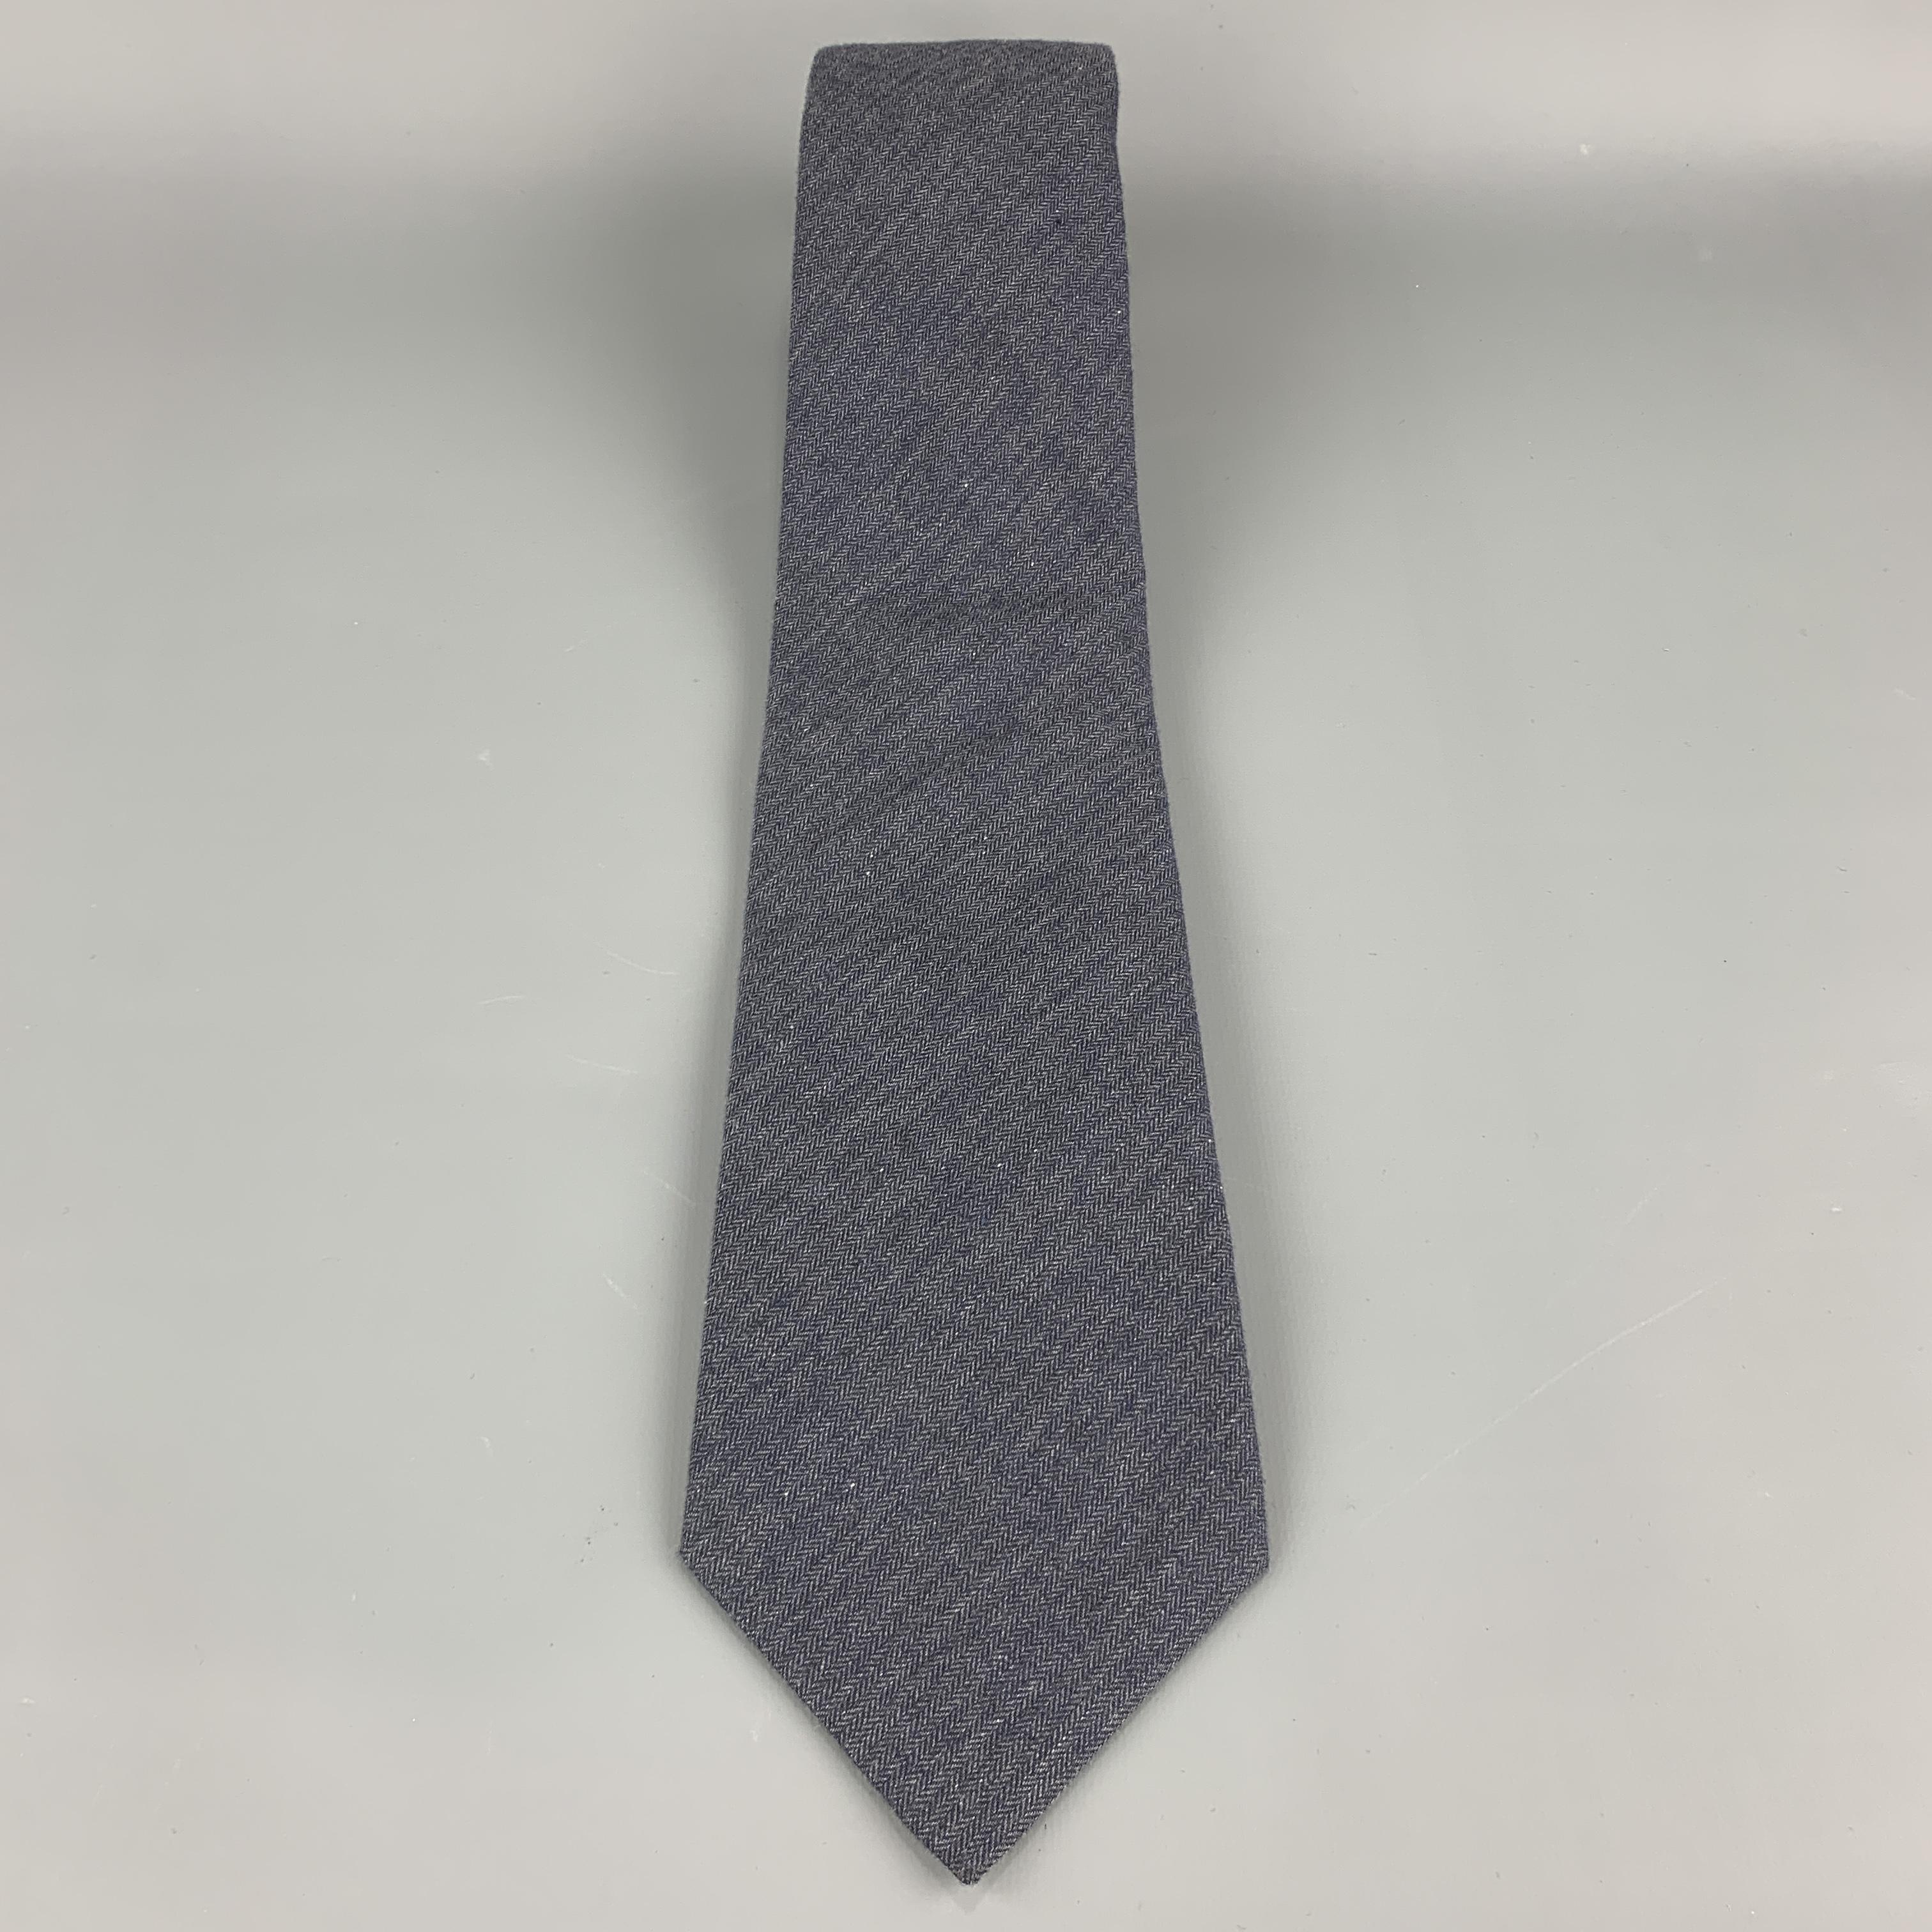 DIRK BIKKEMBERGS necktie comes in muted navy blue cotton with all over herringbone print. Made in Italy.

Excellent Pre-Owned Condition.

Width: 3.75 